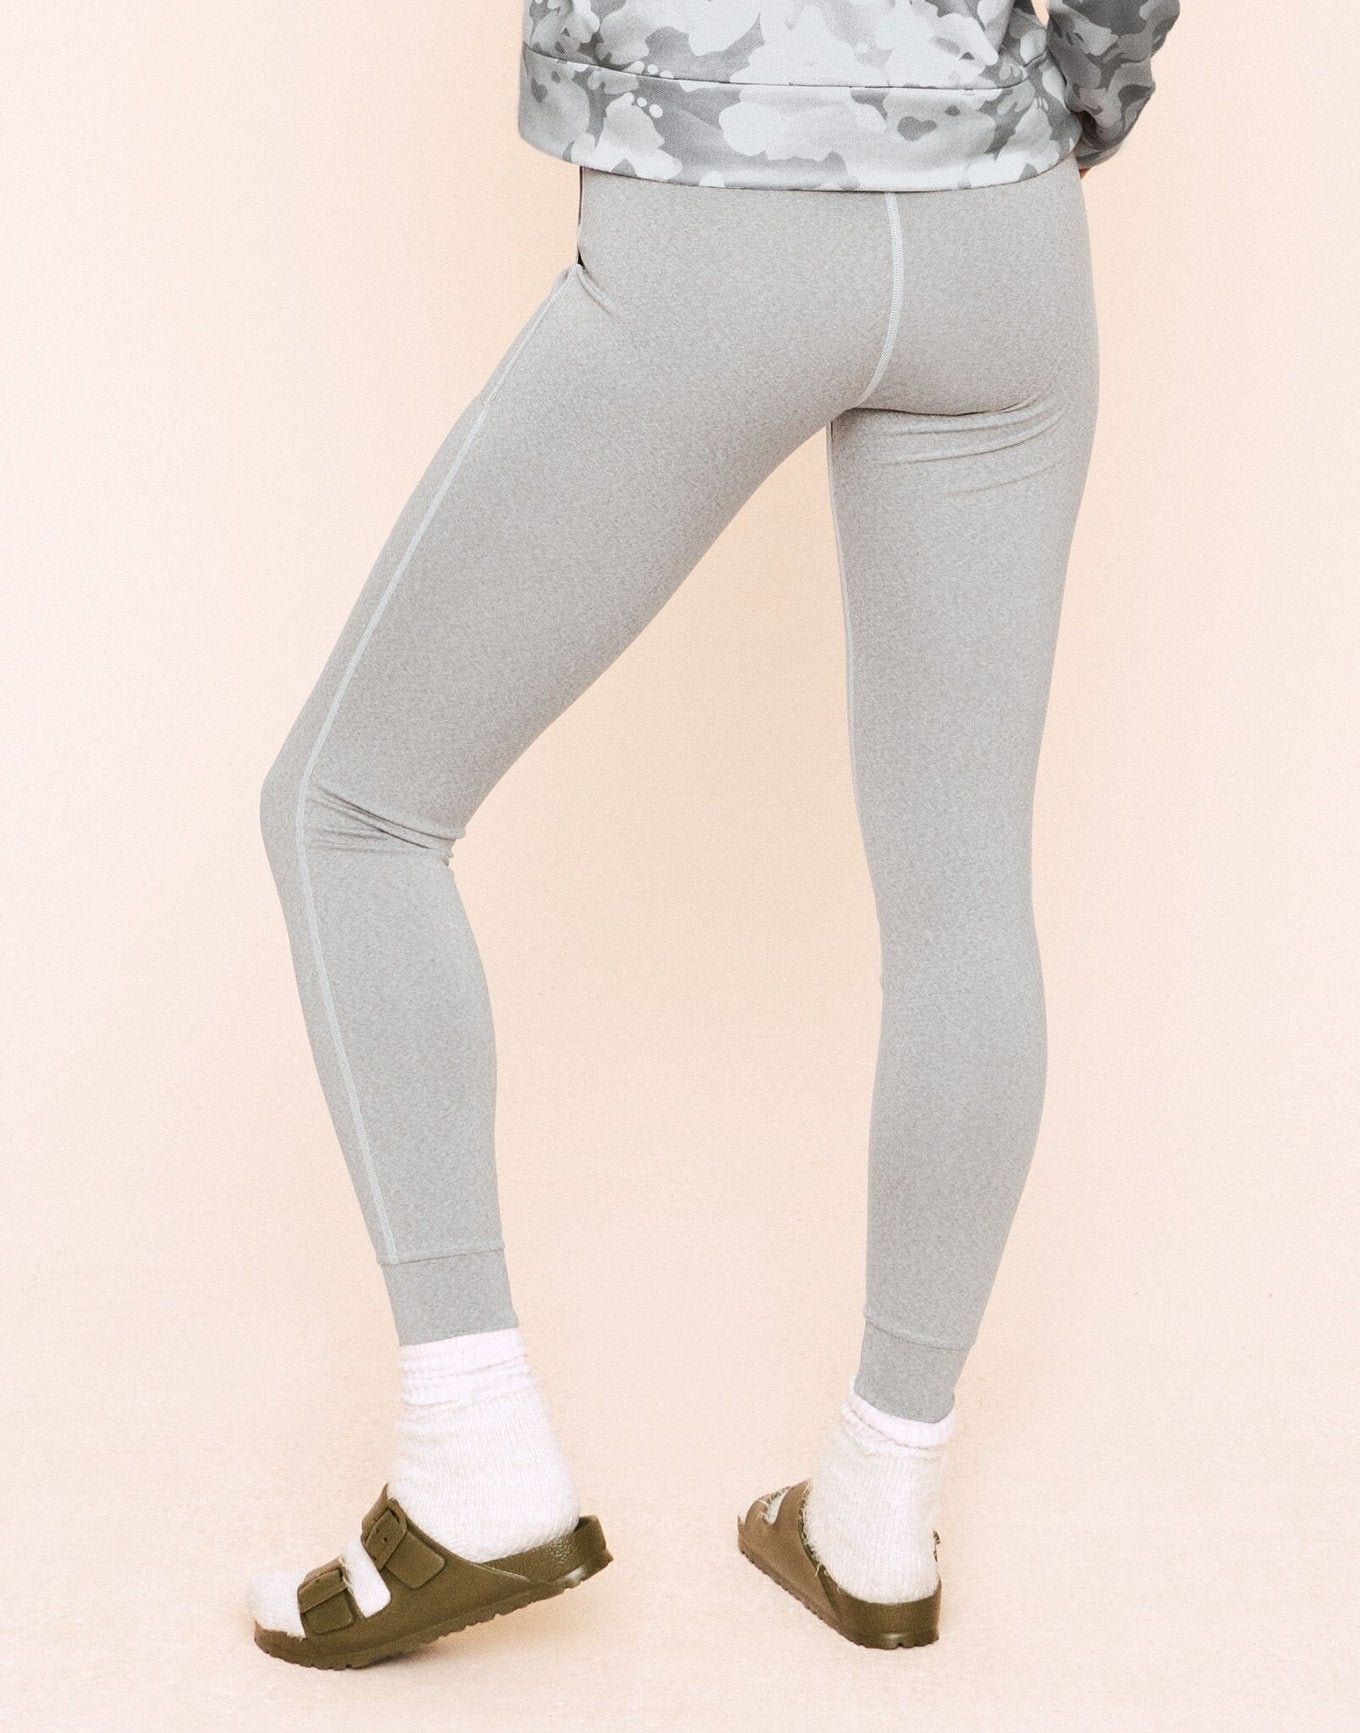 Earth Republic Jenesis Fitted Legging Leggings in color Oyster Mushroom Marl and shape pant